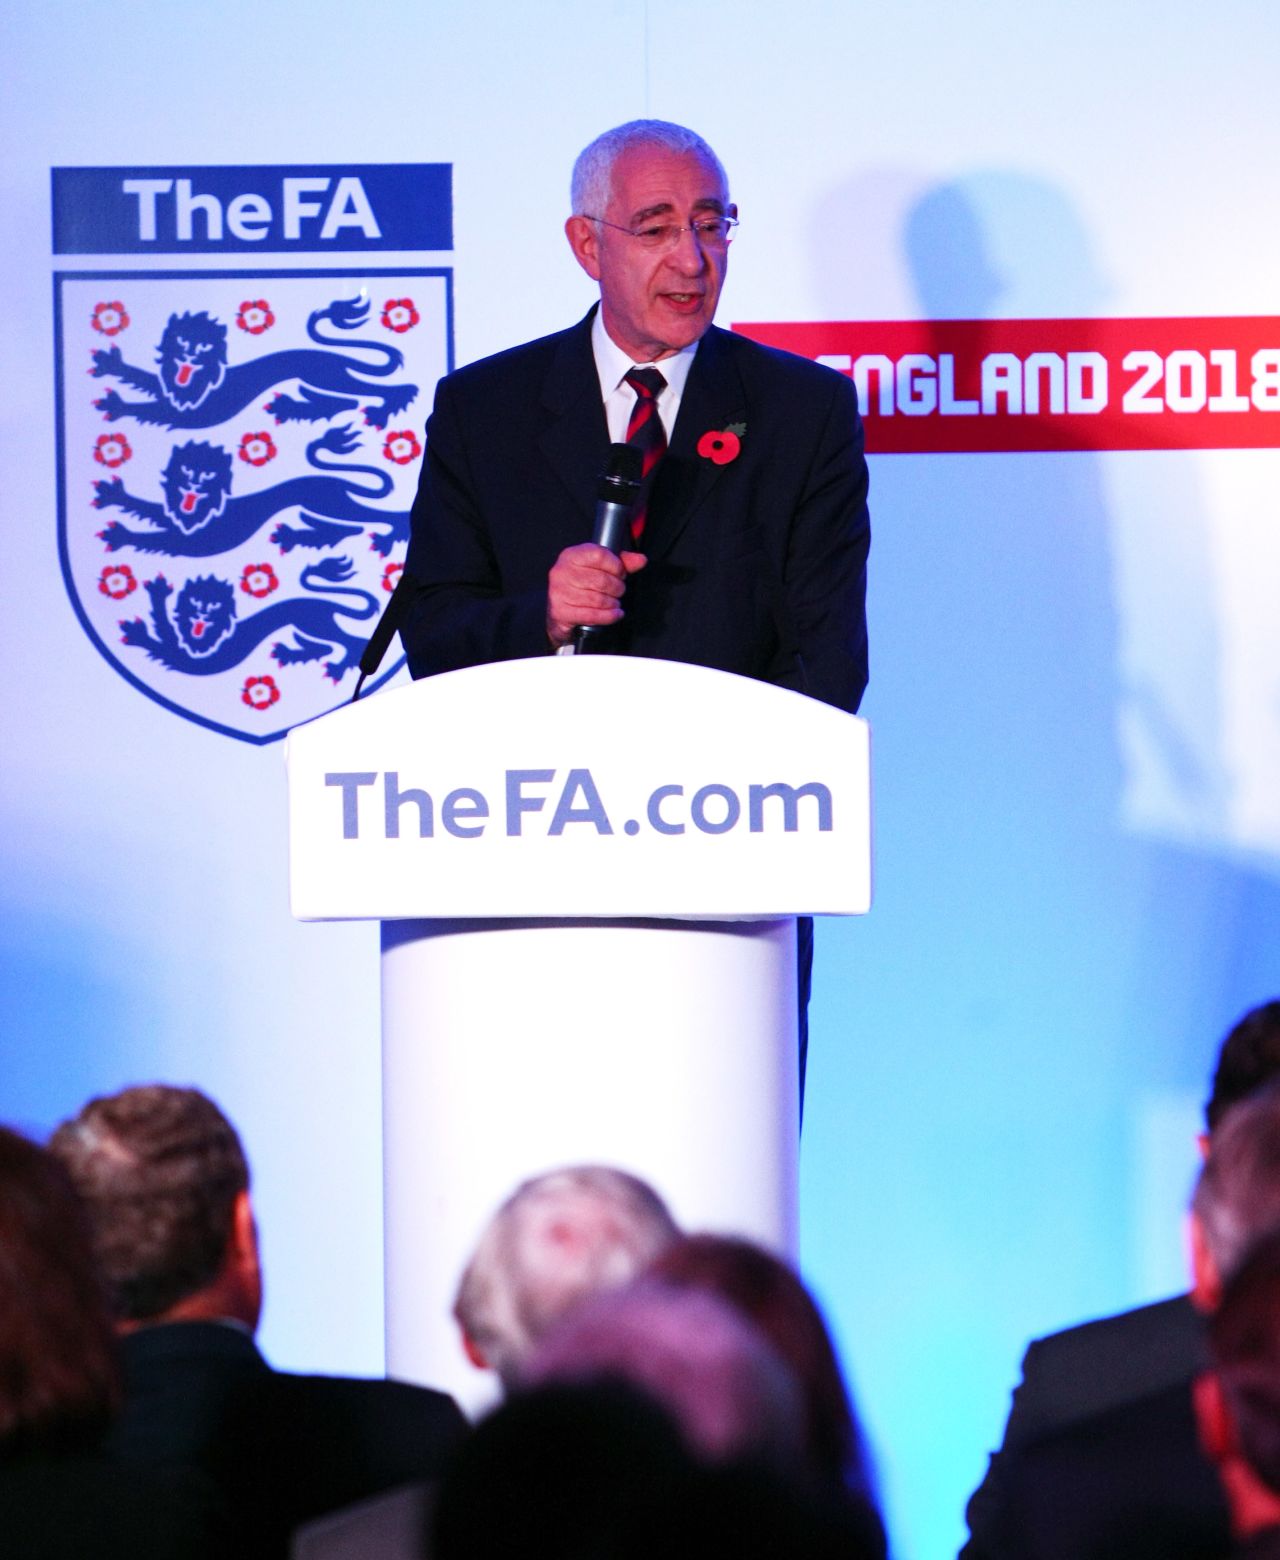 Just a few weeks before FIFA's presidential vote, former FA chairman David Triesman gives evidence at a UK parliamentary enquiry into England's failed 2018 bid. Under the cover of parliamentary privilege Triesman accused FIFA Ex Co members  Warner, Nicholas Leoz, Ricardo Texeira and Worawi Makudi of trying to secure cash and privileges in return for their vote. In other evidence submitted to the committee from the Sunday Times, it was alleged that FIFA vice-president Issa Hayatou along with fellow Ex Co member Jacques Anouma has been paid $1.5 million by Qatar for their World Cup vote. All those accused strenuously deny the allegations.